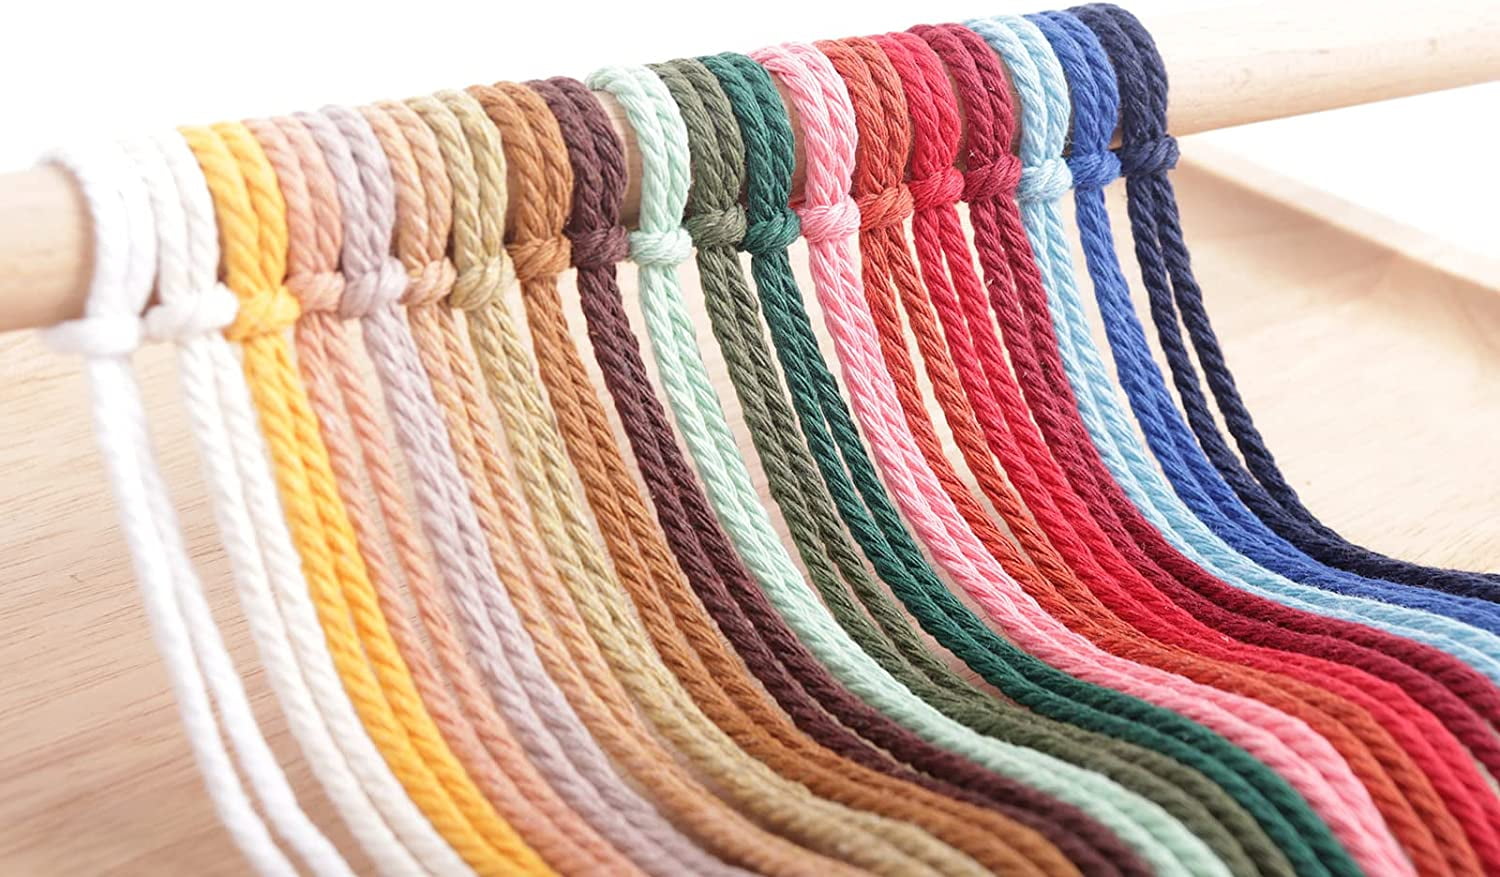 Colored 5mm Macrame Cord 230 Feet X 1.1 Lbs, Natural Macrame Supplies,  Large Macrame Rope For Wall Hanging & Crafts, Cotton Rope Of Macrame Kit,  Macra